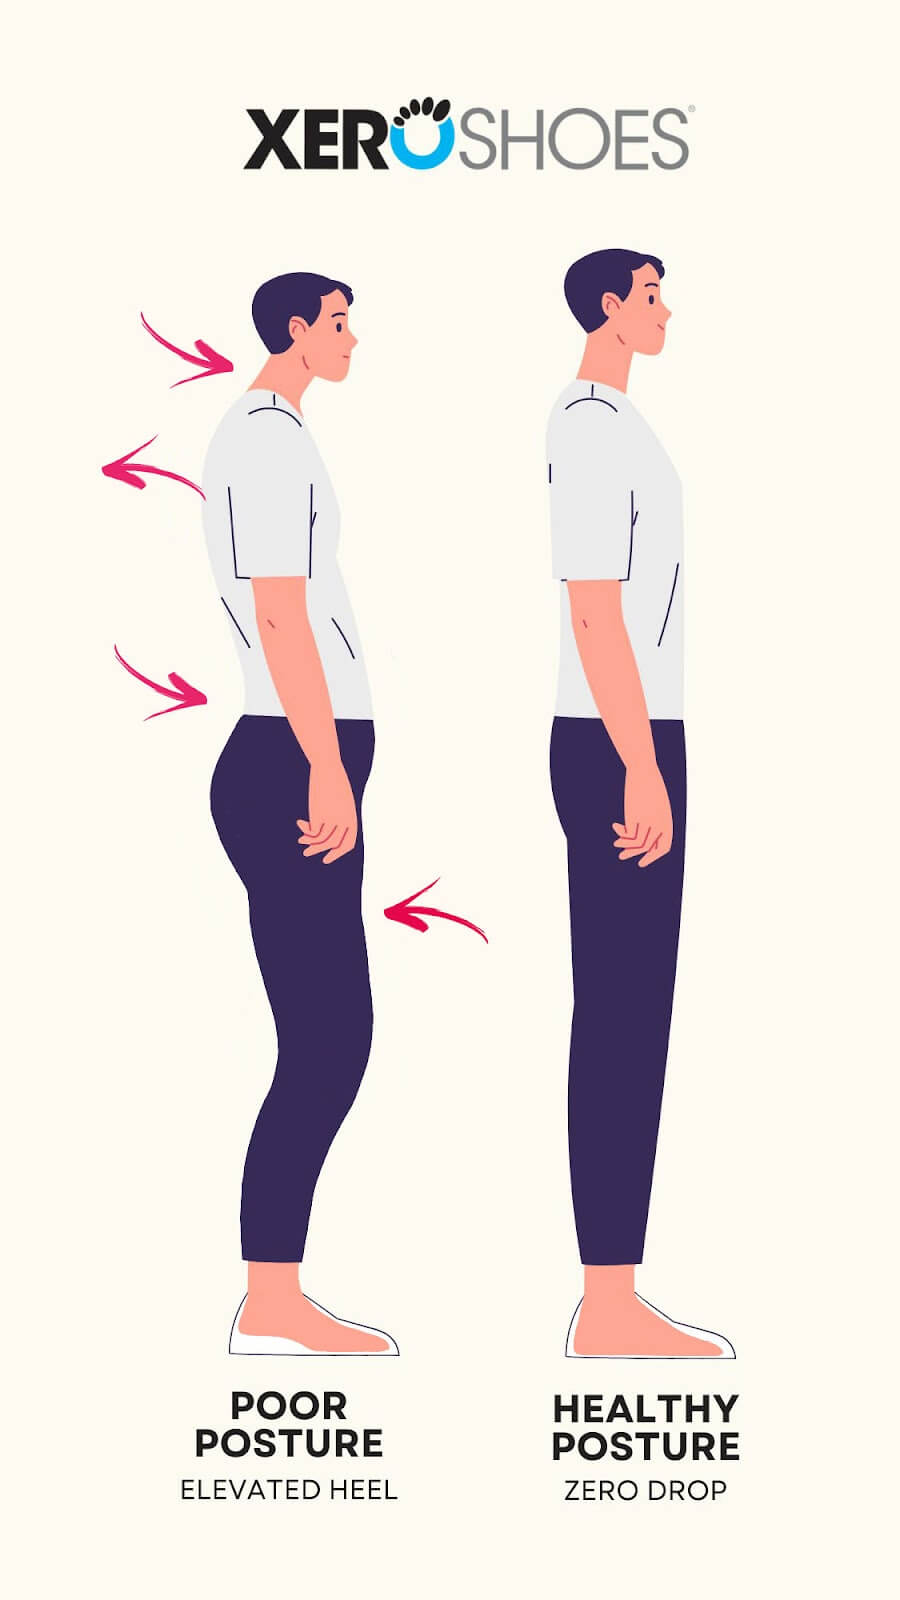 The normal standing upright posture